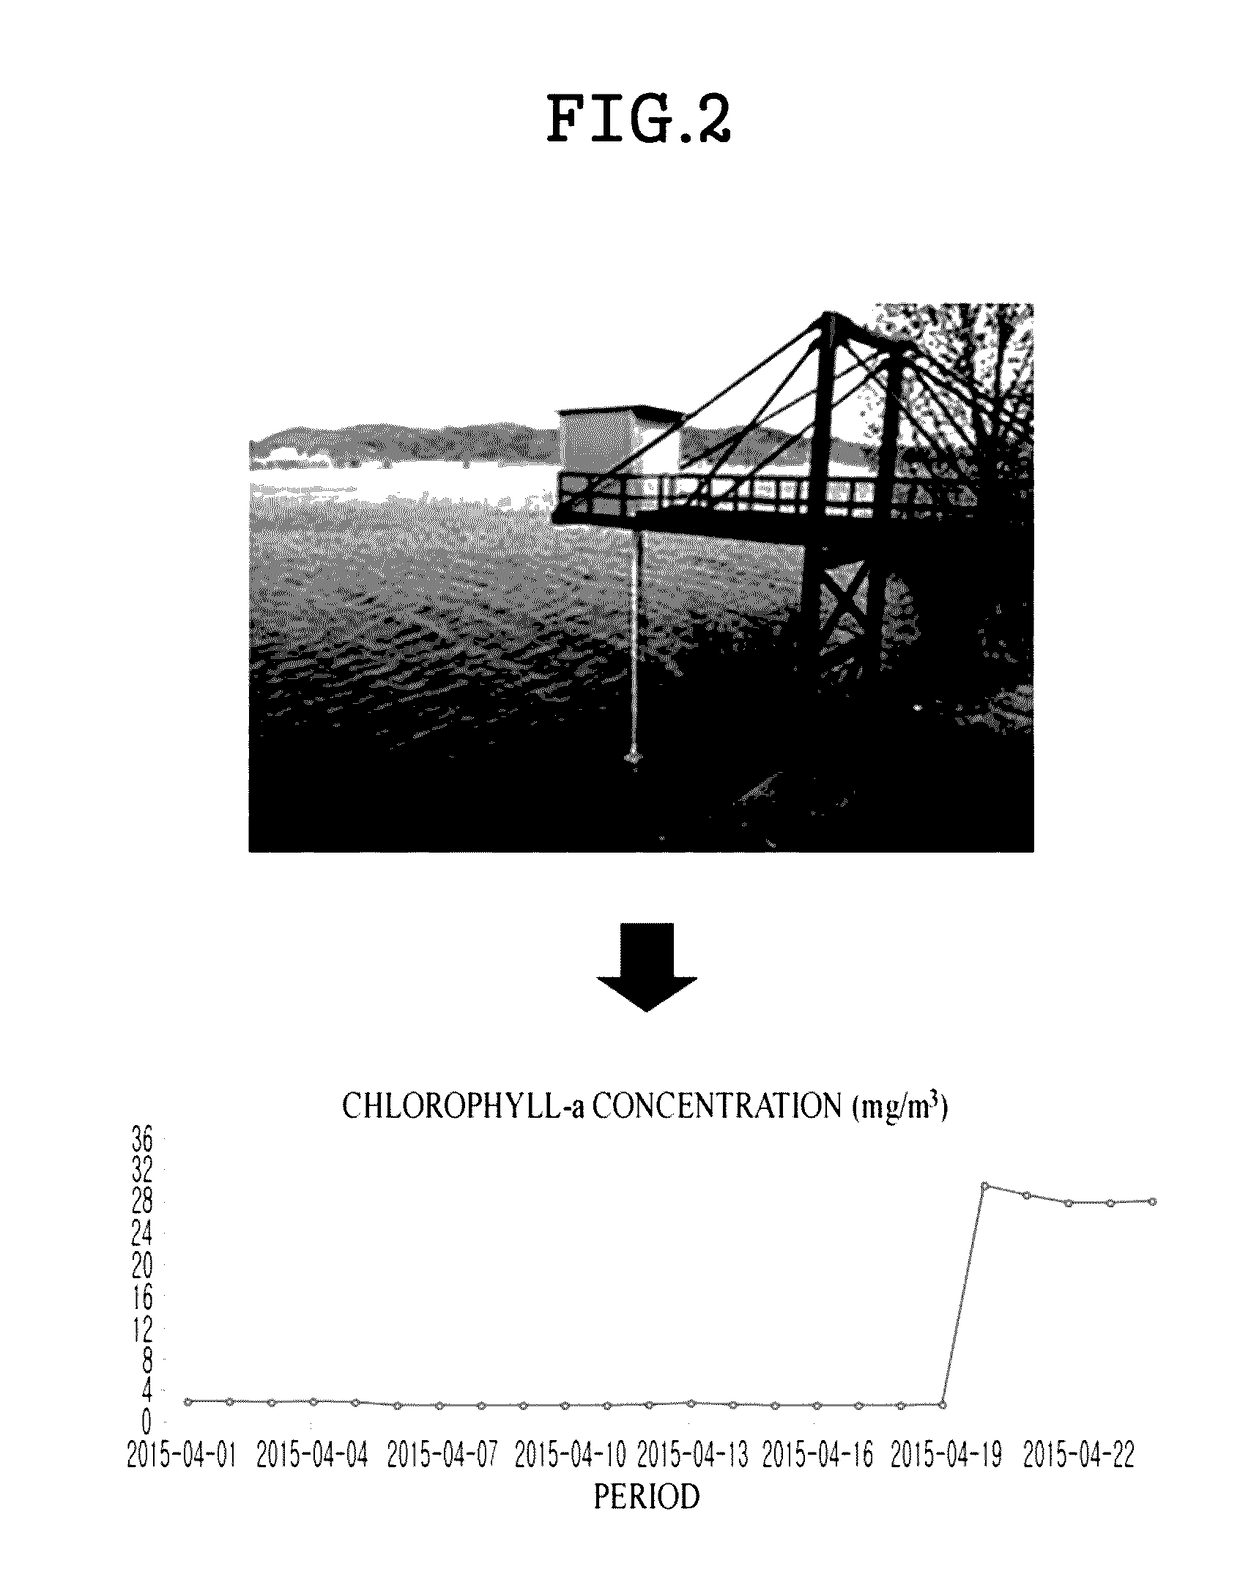 METHOD AND APPARATUS FOR PREDICTING CHLOROPHYLL-a CONCENTRATION IN RIVER USING SATELLITE IMAGE DATA AND NONLINEAR RANSAC METHOD